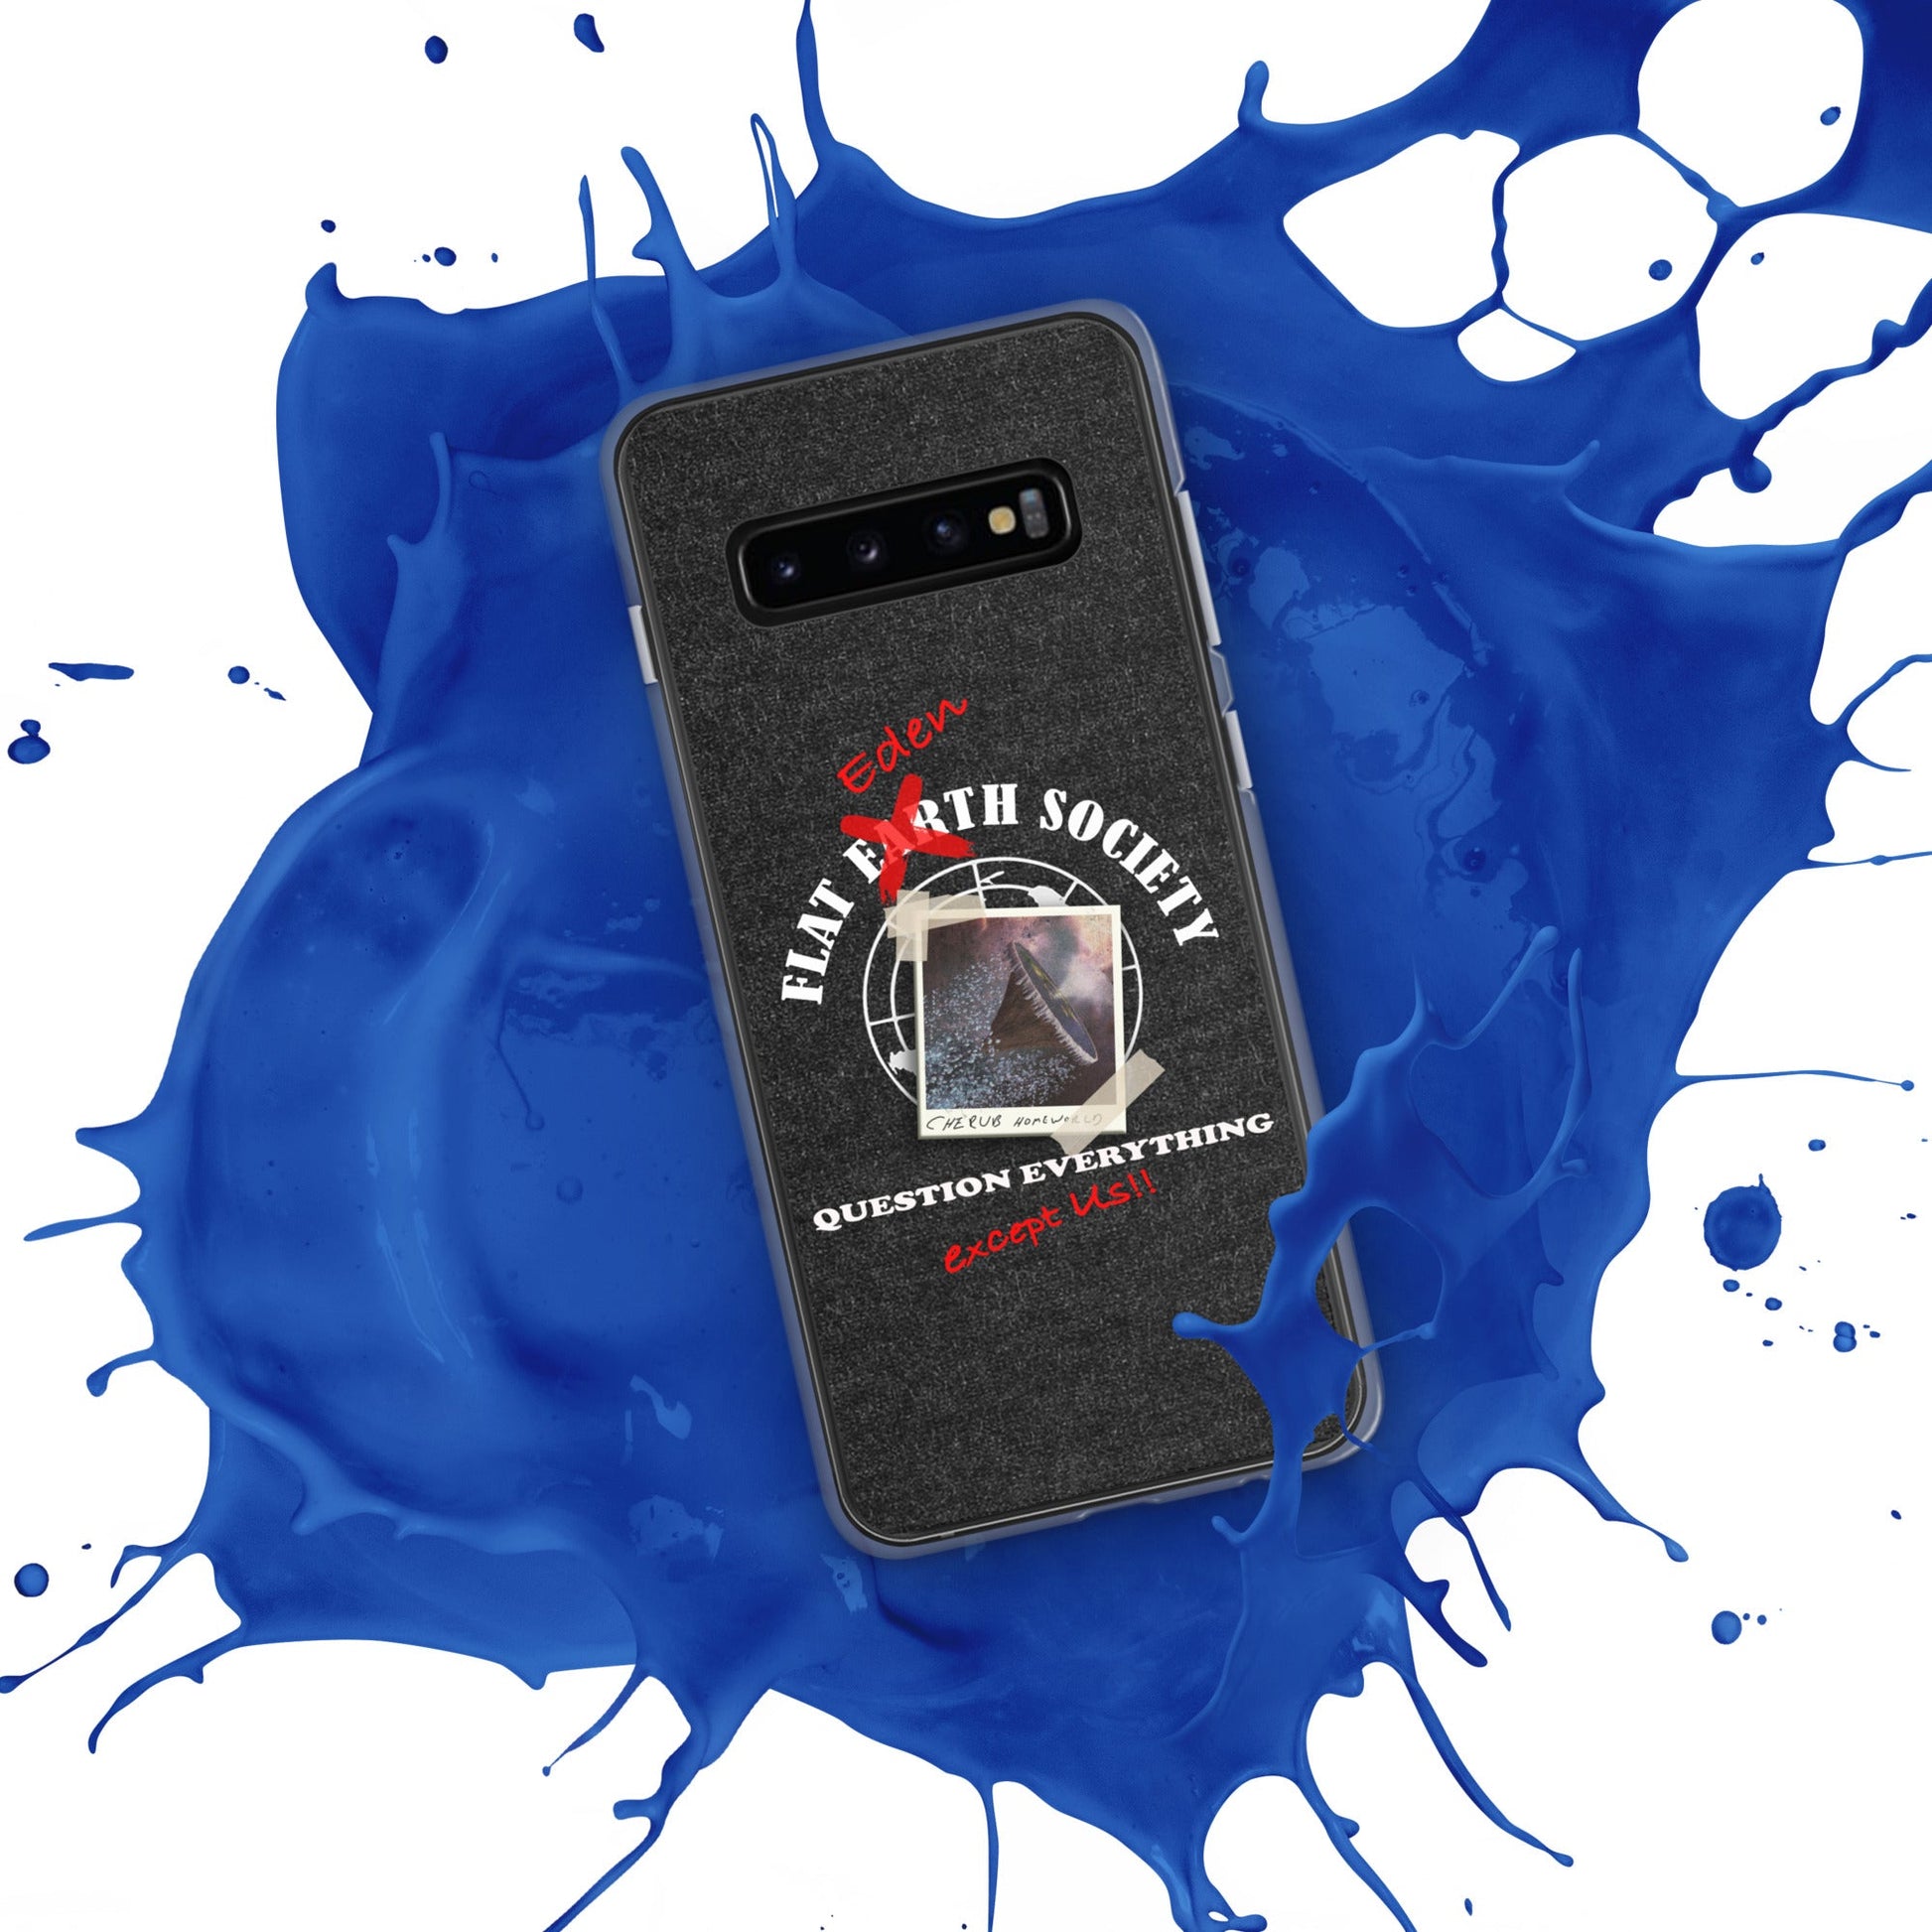 Samsung | Intergalactic Space Force 2 | Flat Eden Society - Spectral Ink Shop - Mobile Phone Cases -7213222_9947